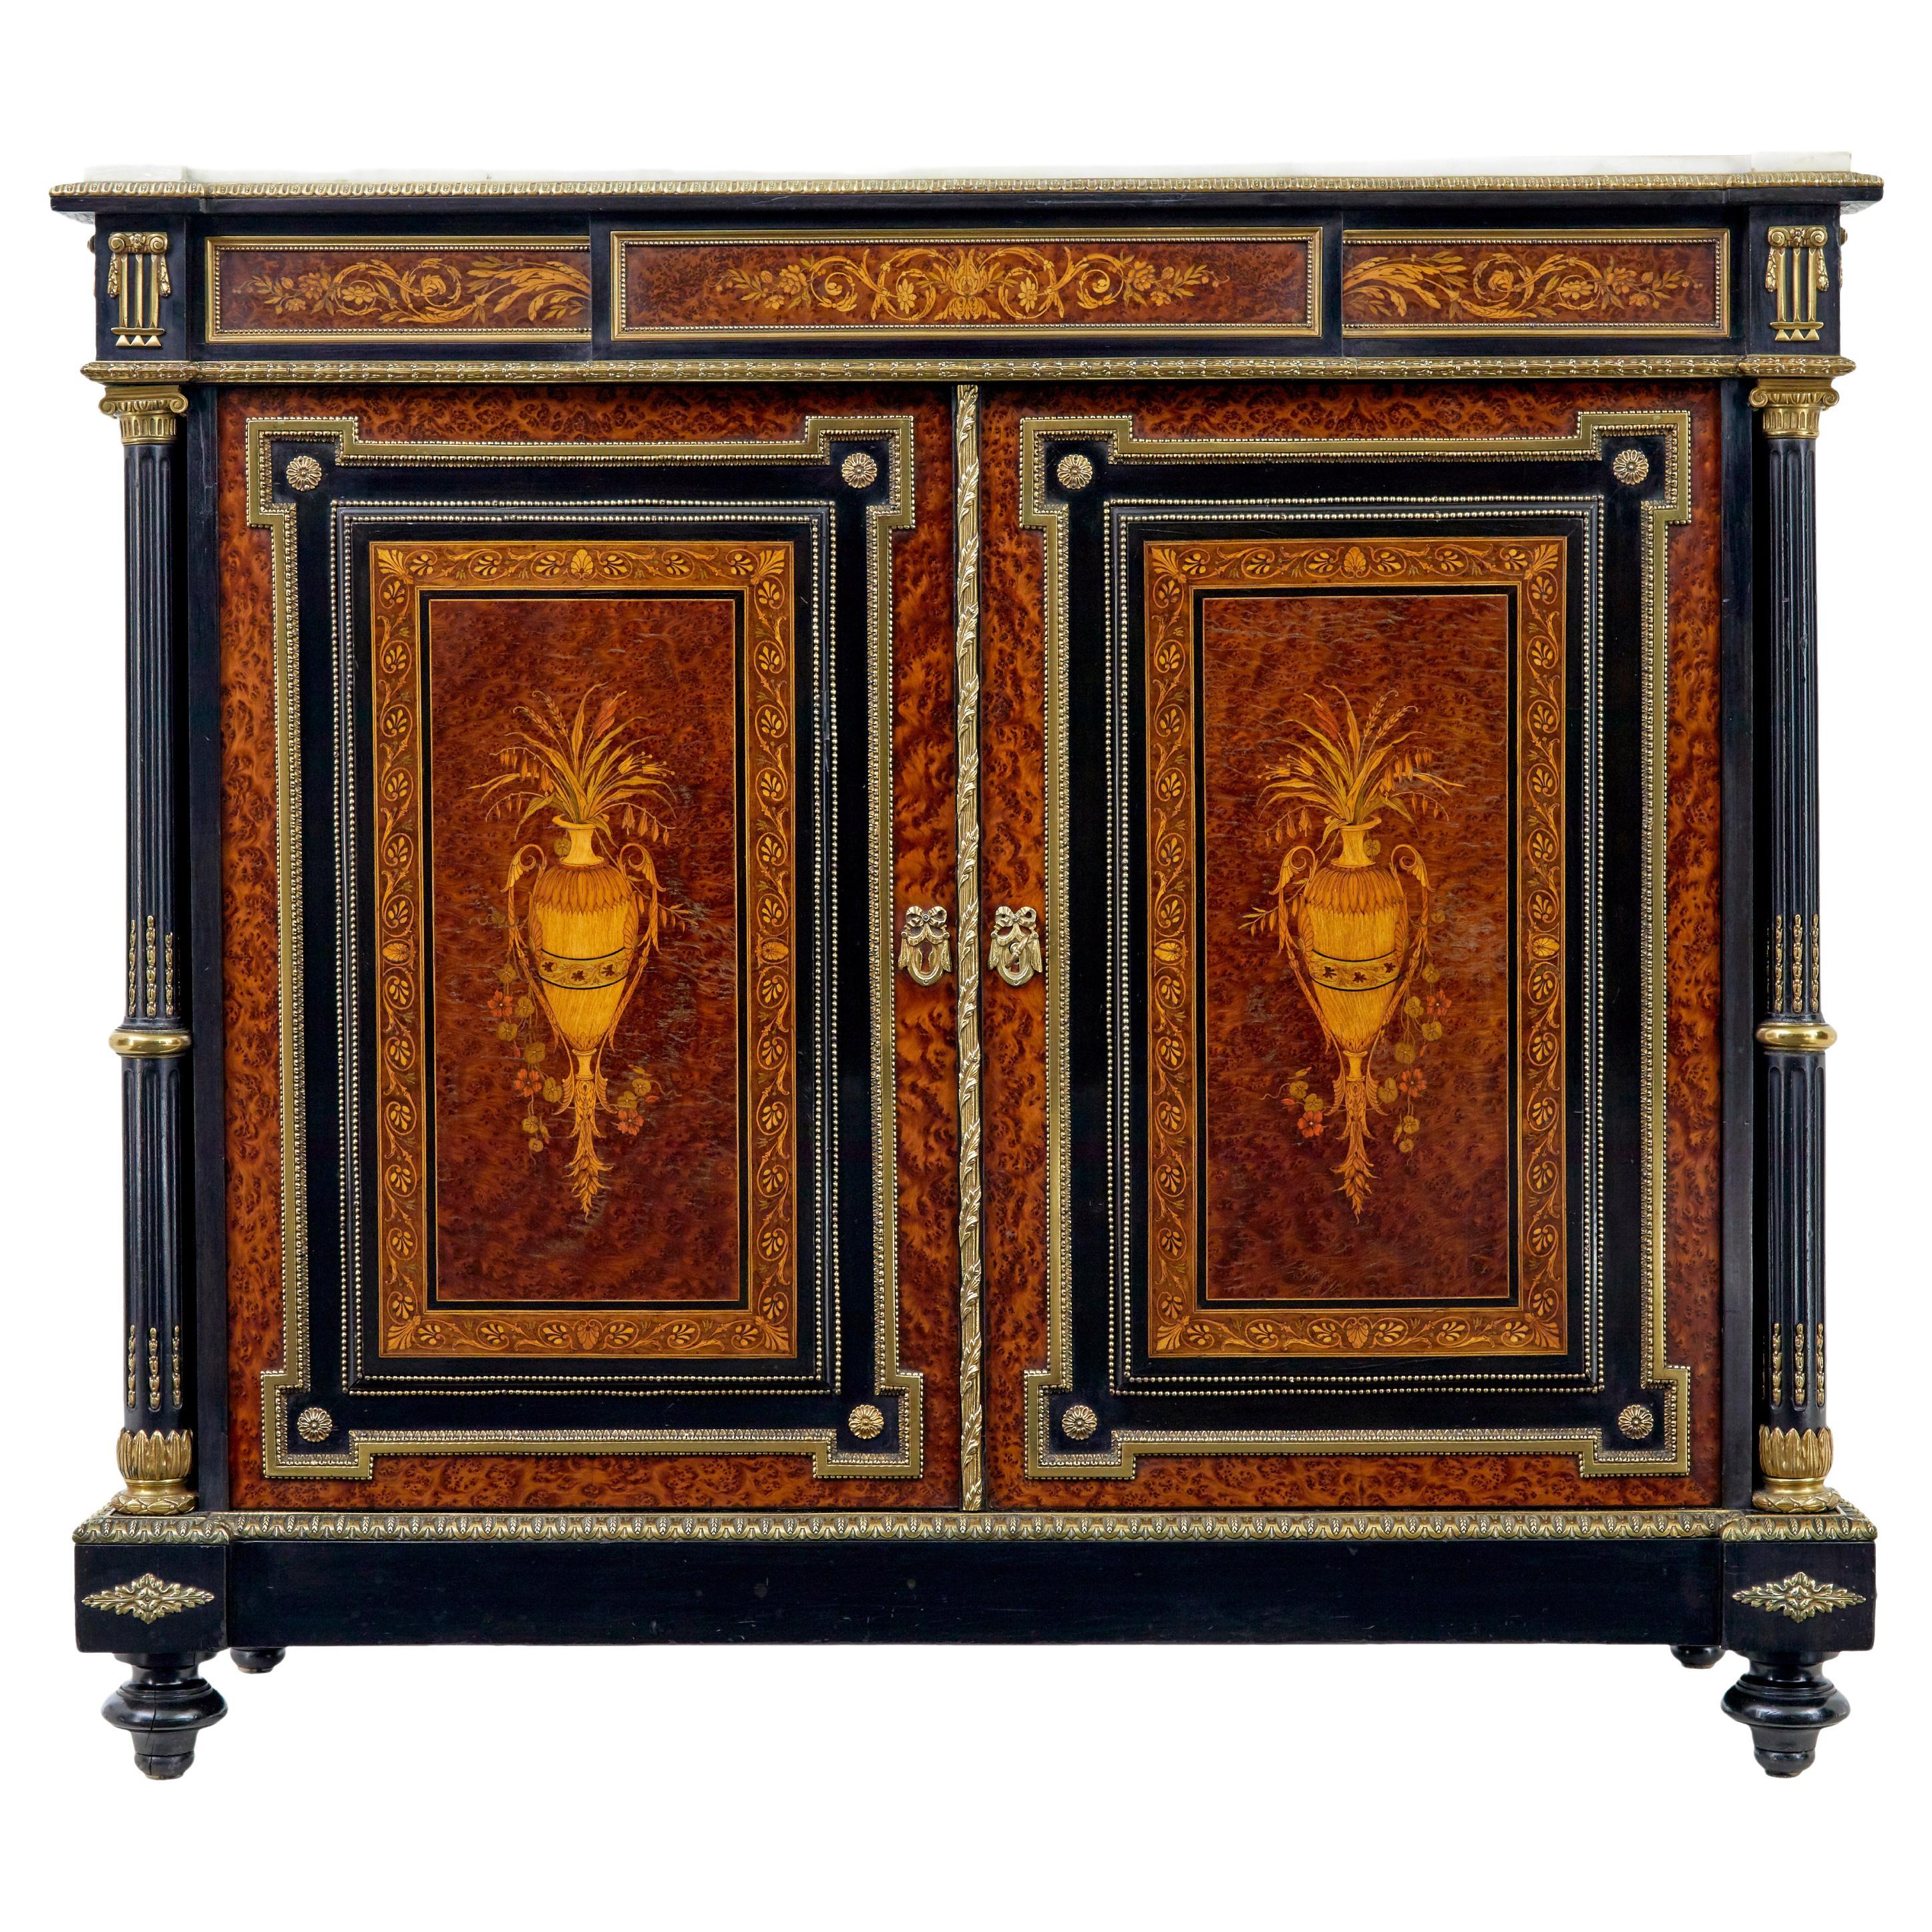 19th century French marble top inlaid amboyna sideboard